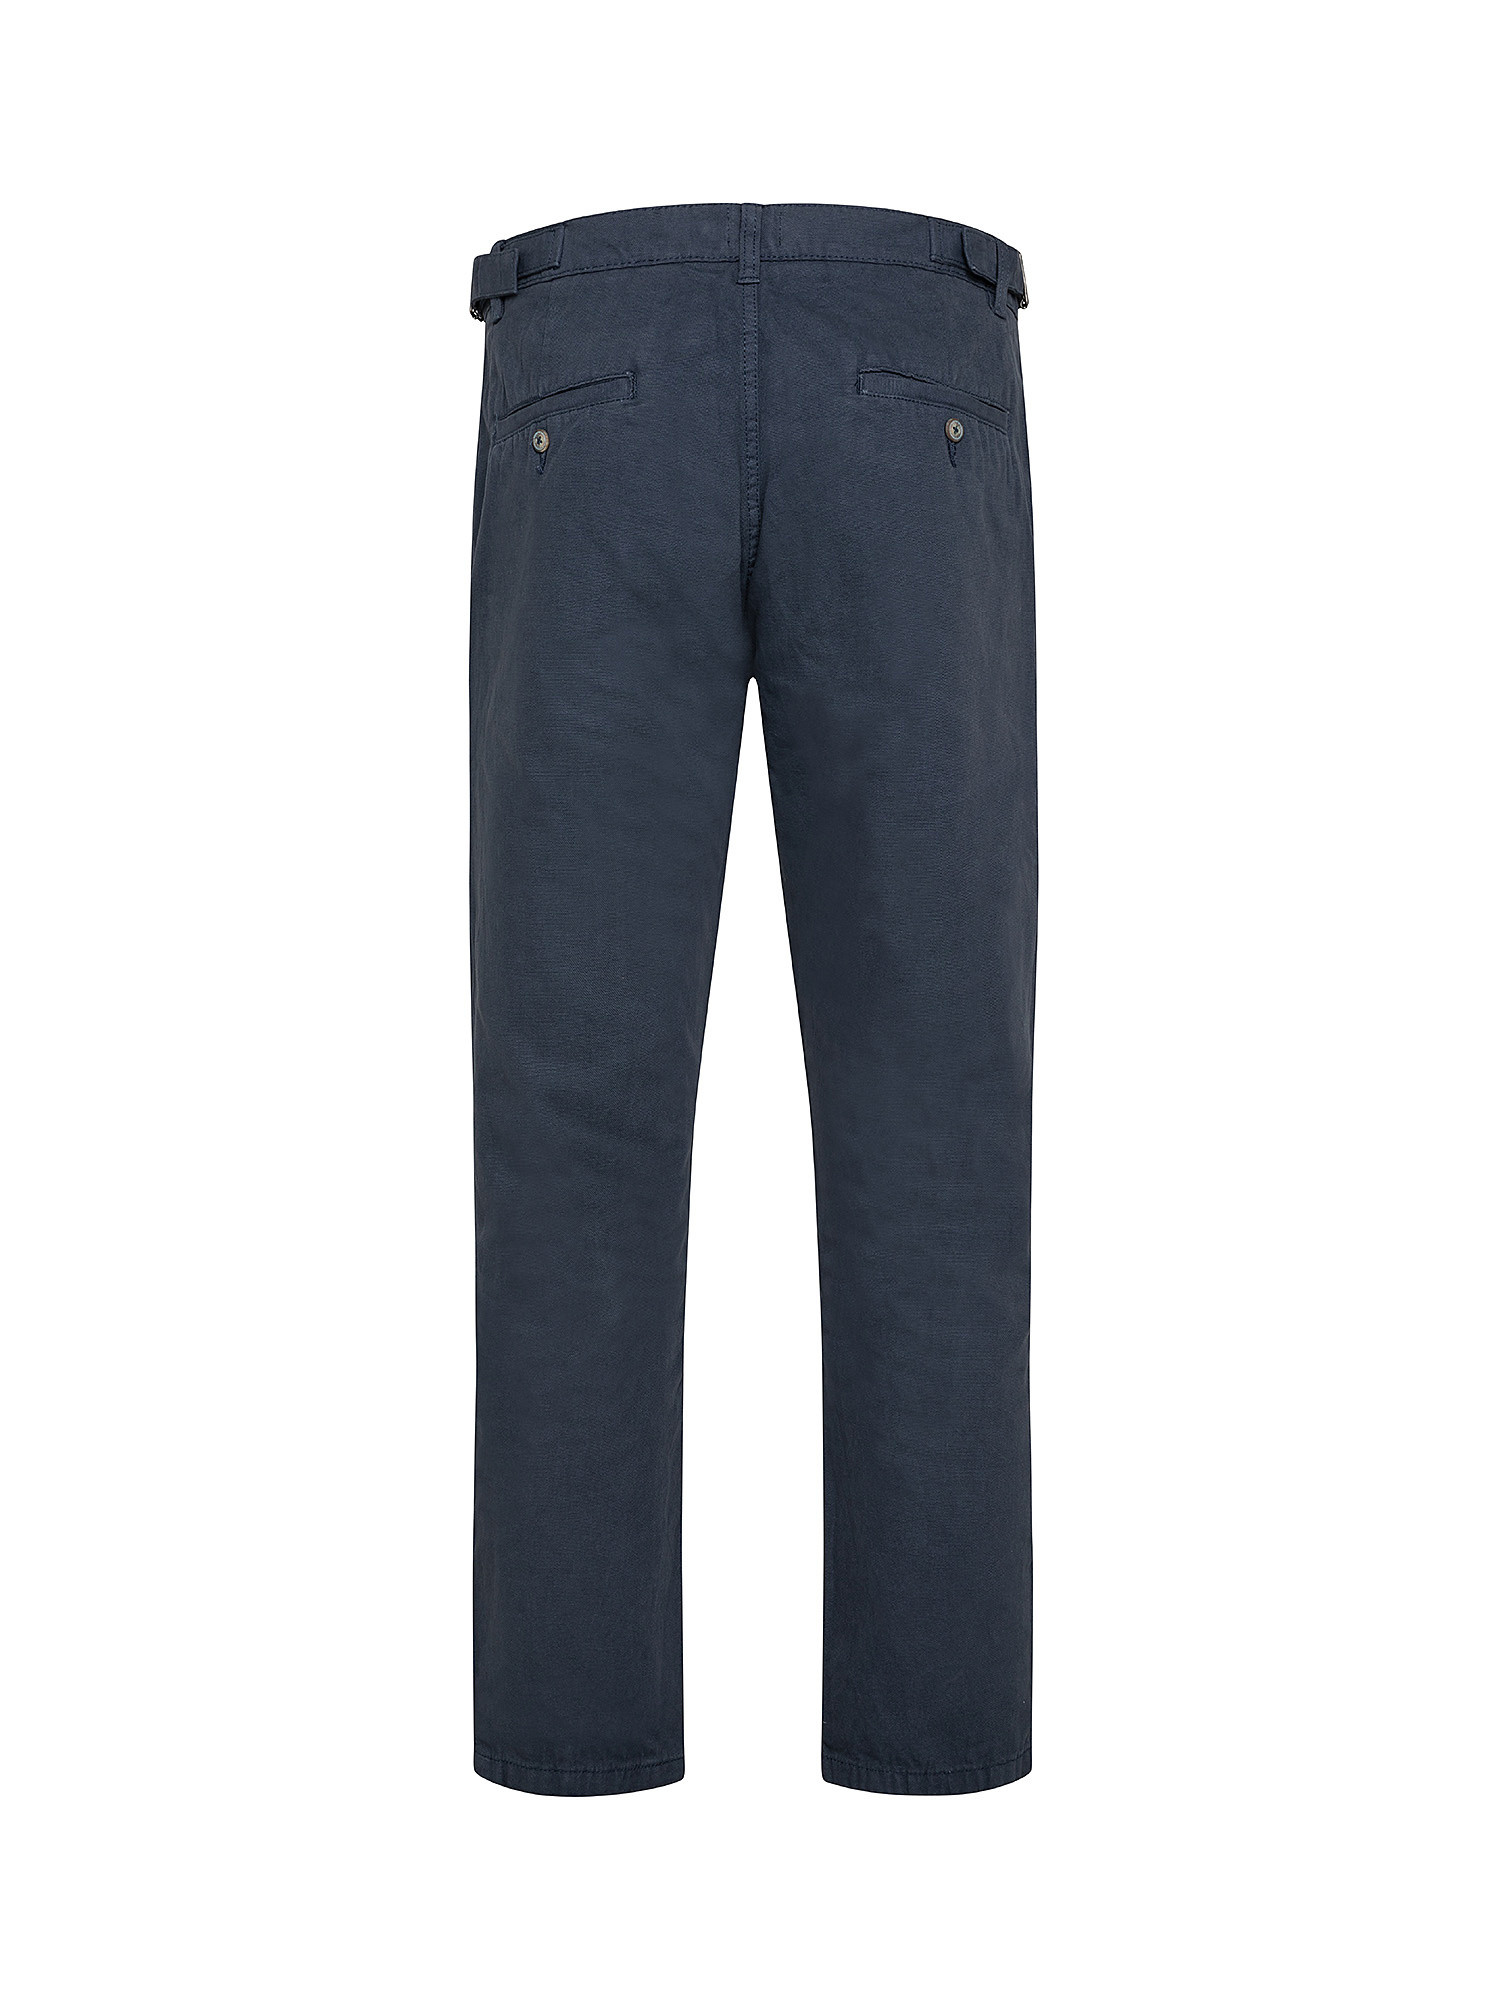 Cotton chinos trousers, Blue, large image number 1